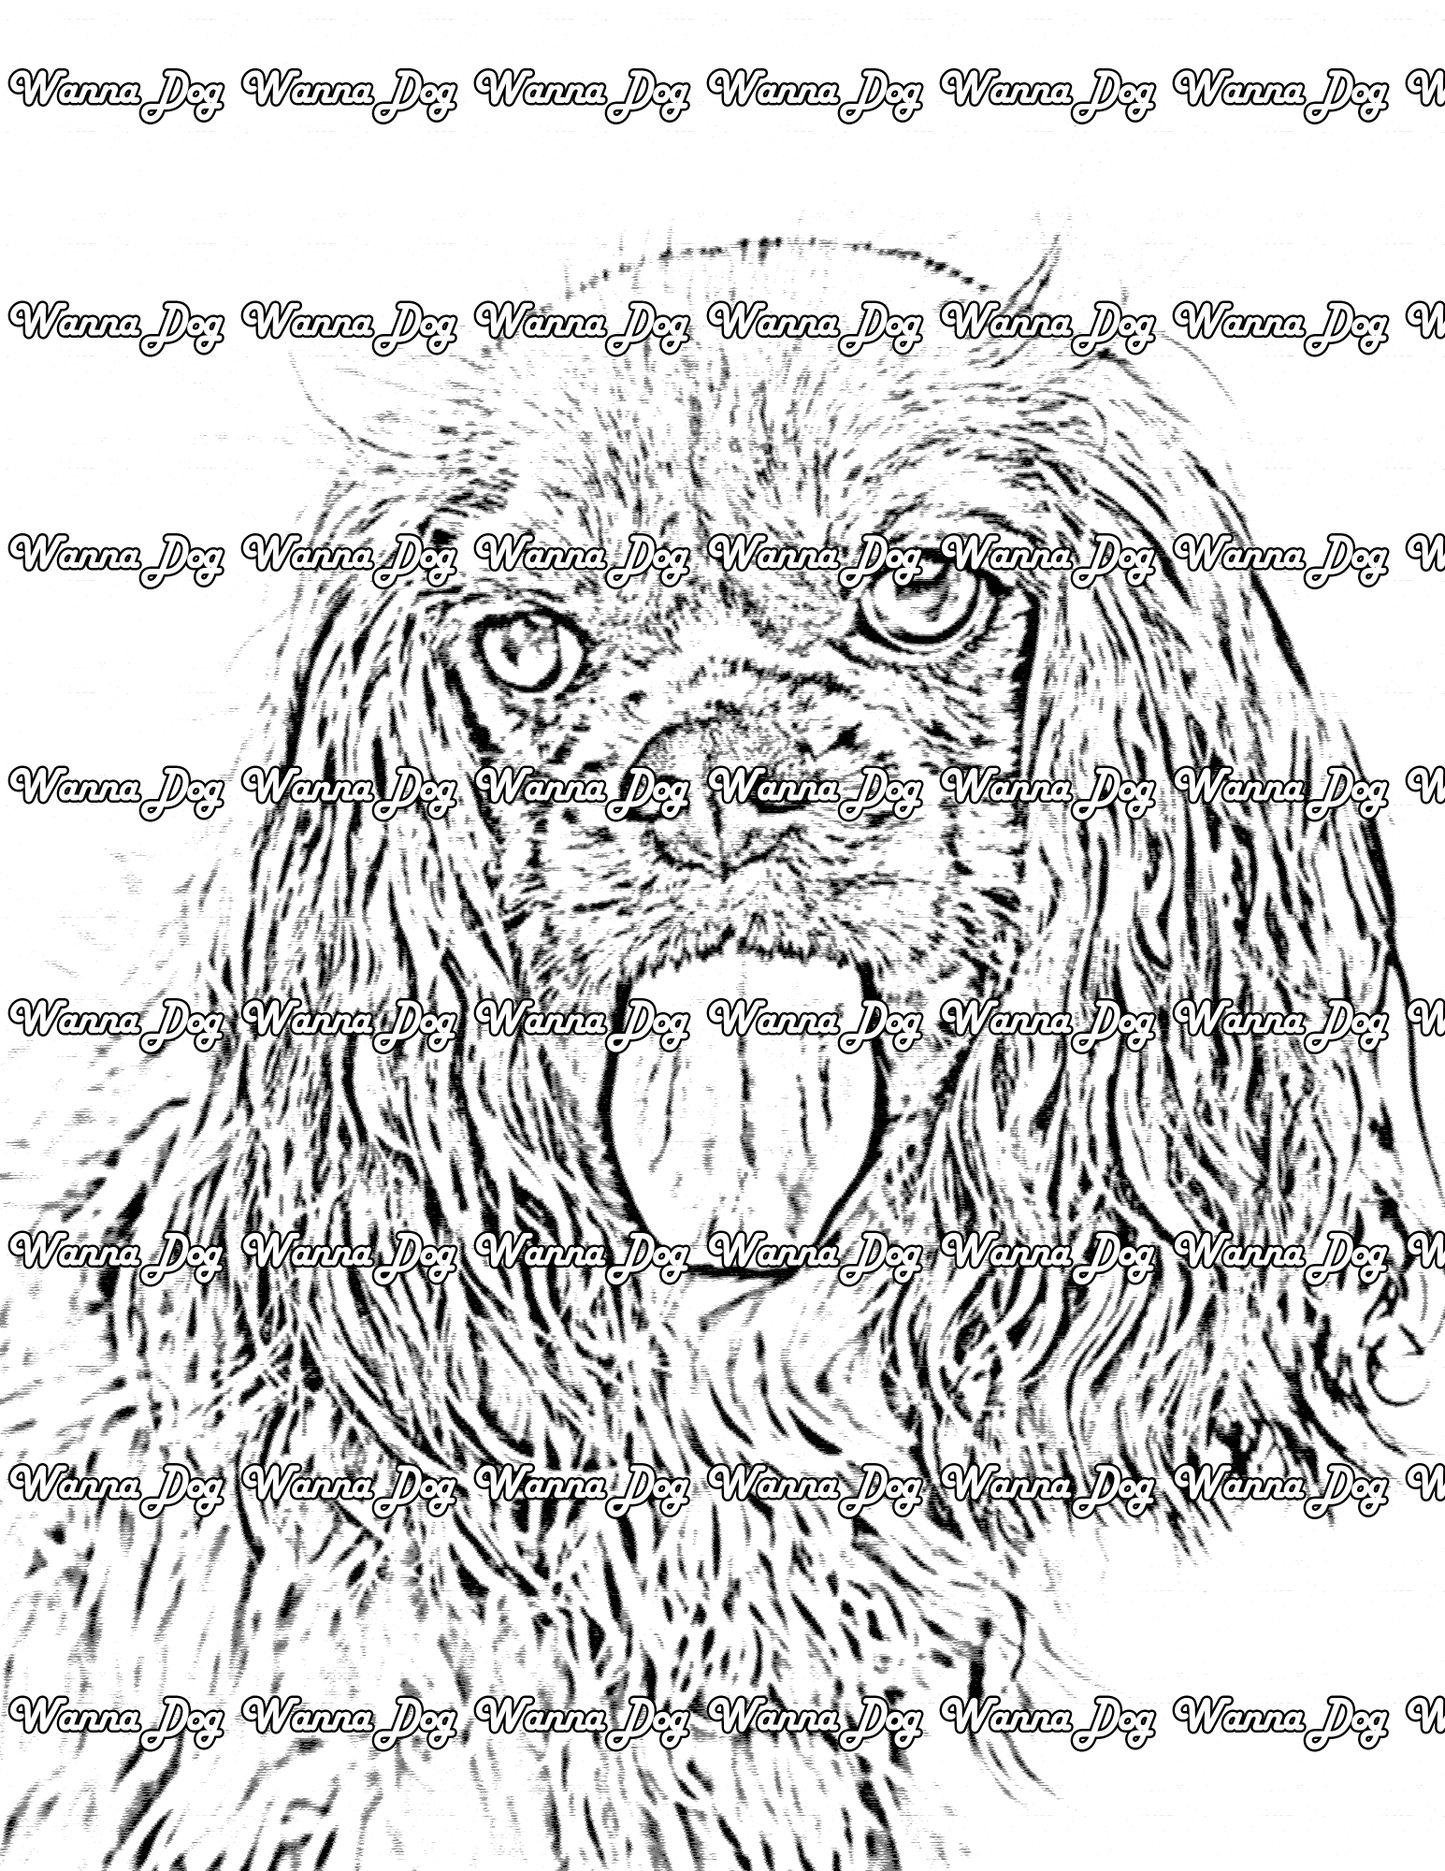 Cavalier King Charles Spaniel Coloring Page of a Cavalier King Charles Spaniel close up with their tongue out